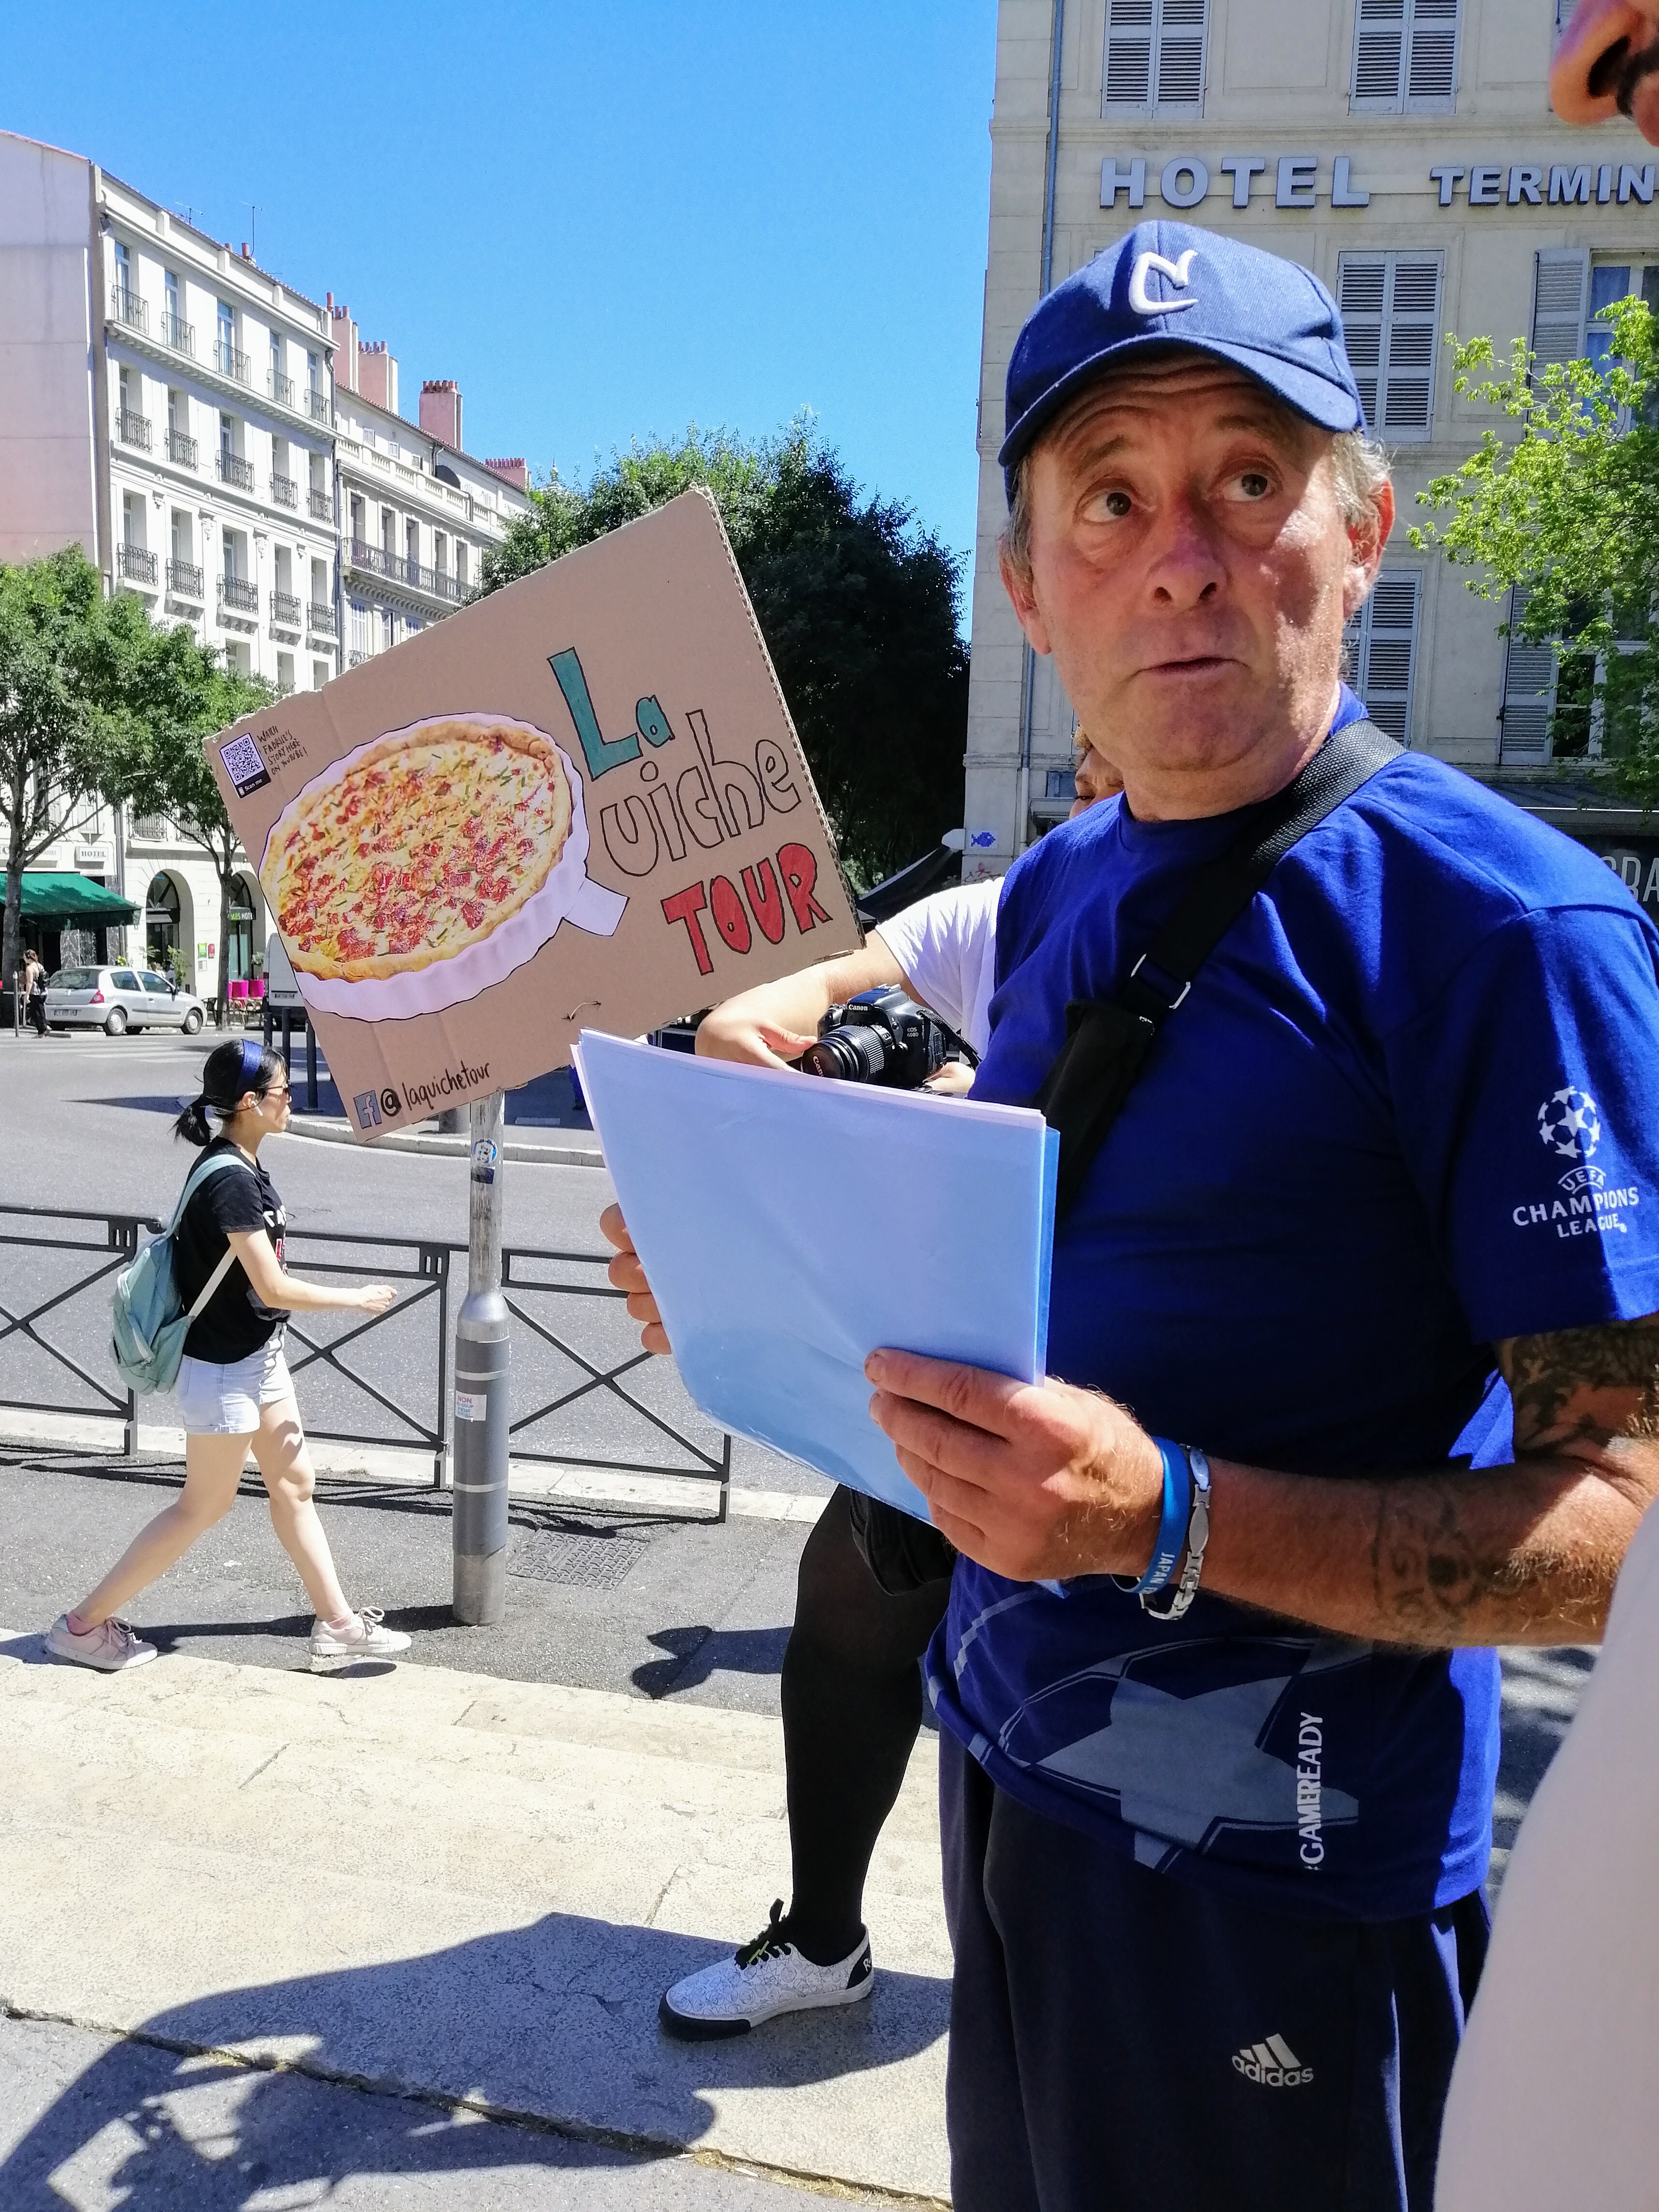 A man with a cap on, standing outdoors with a sign with words "La Quiche Tour", which has a picture of a quiche on it too.